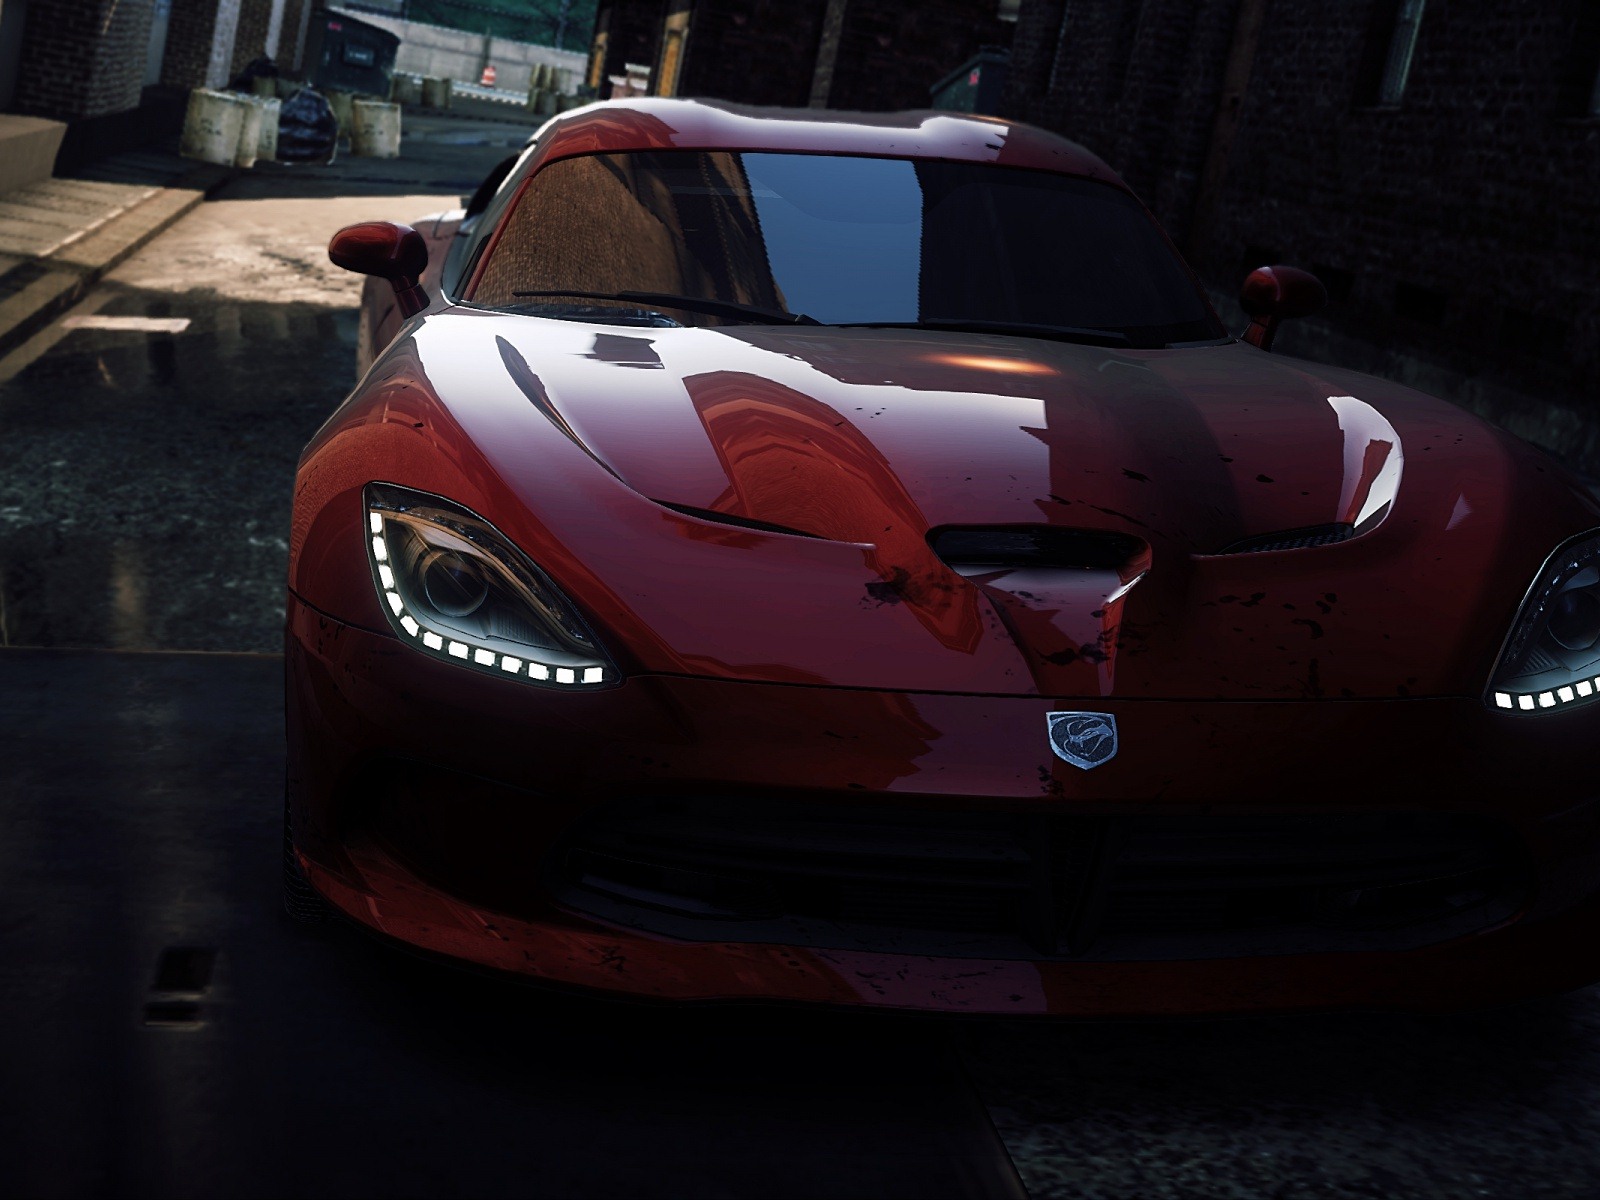 Need for Speed: Most Wanted 极品飞车17：最高通缉 高清壁纸2 - 1600x1200